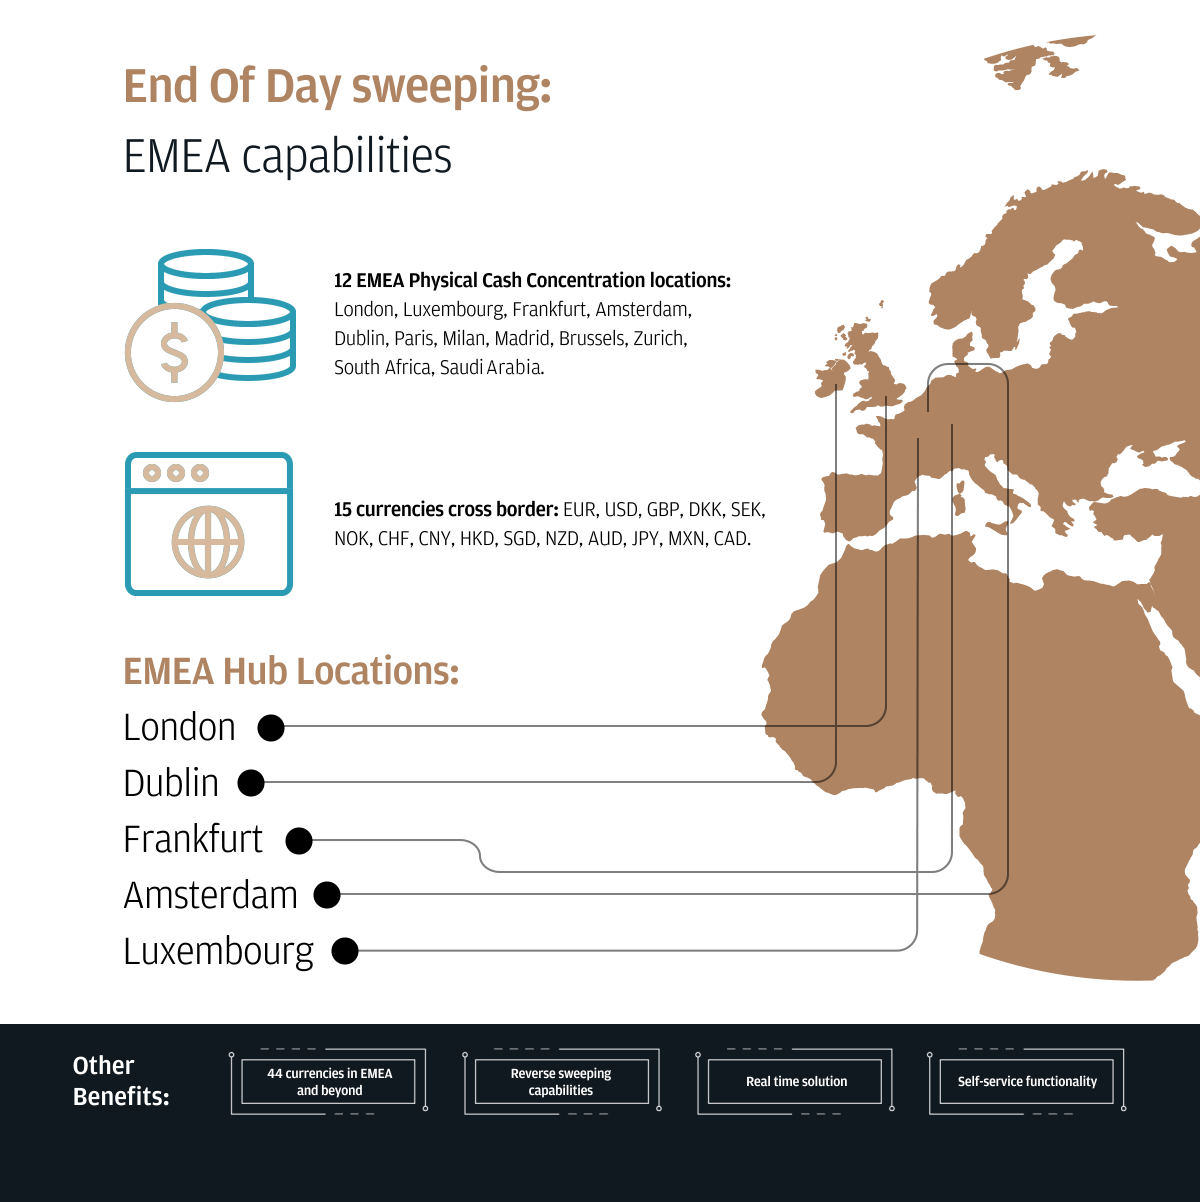 End Of Day sweeping: EMEA capabilities